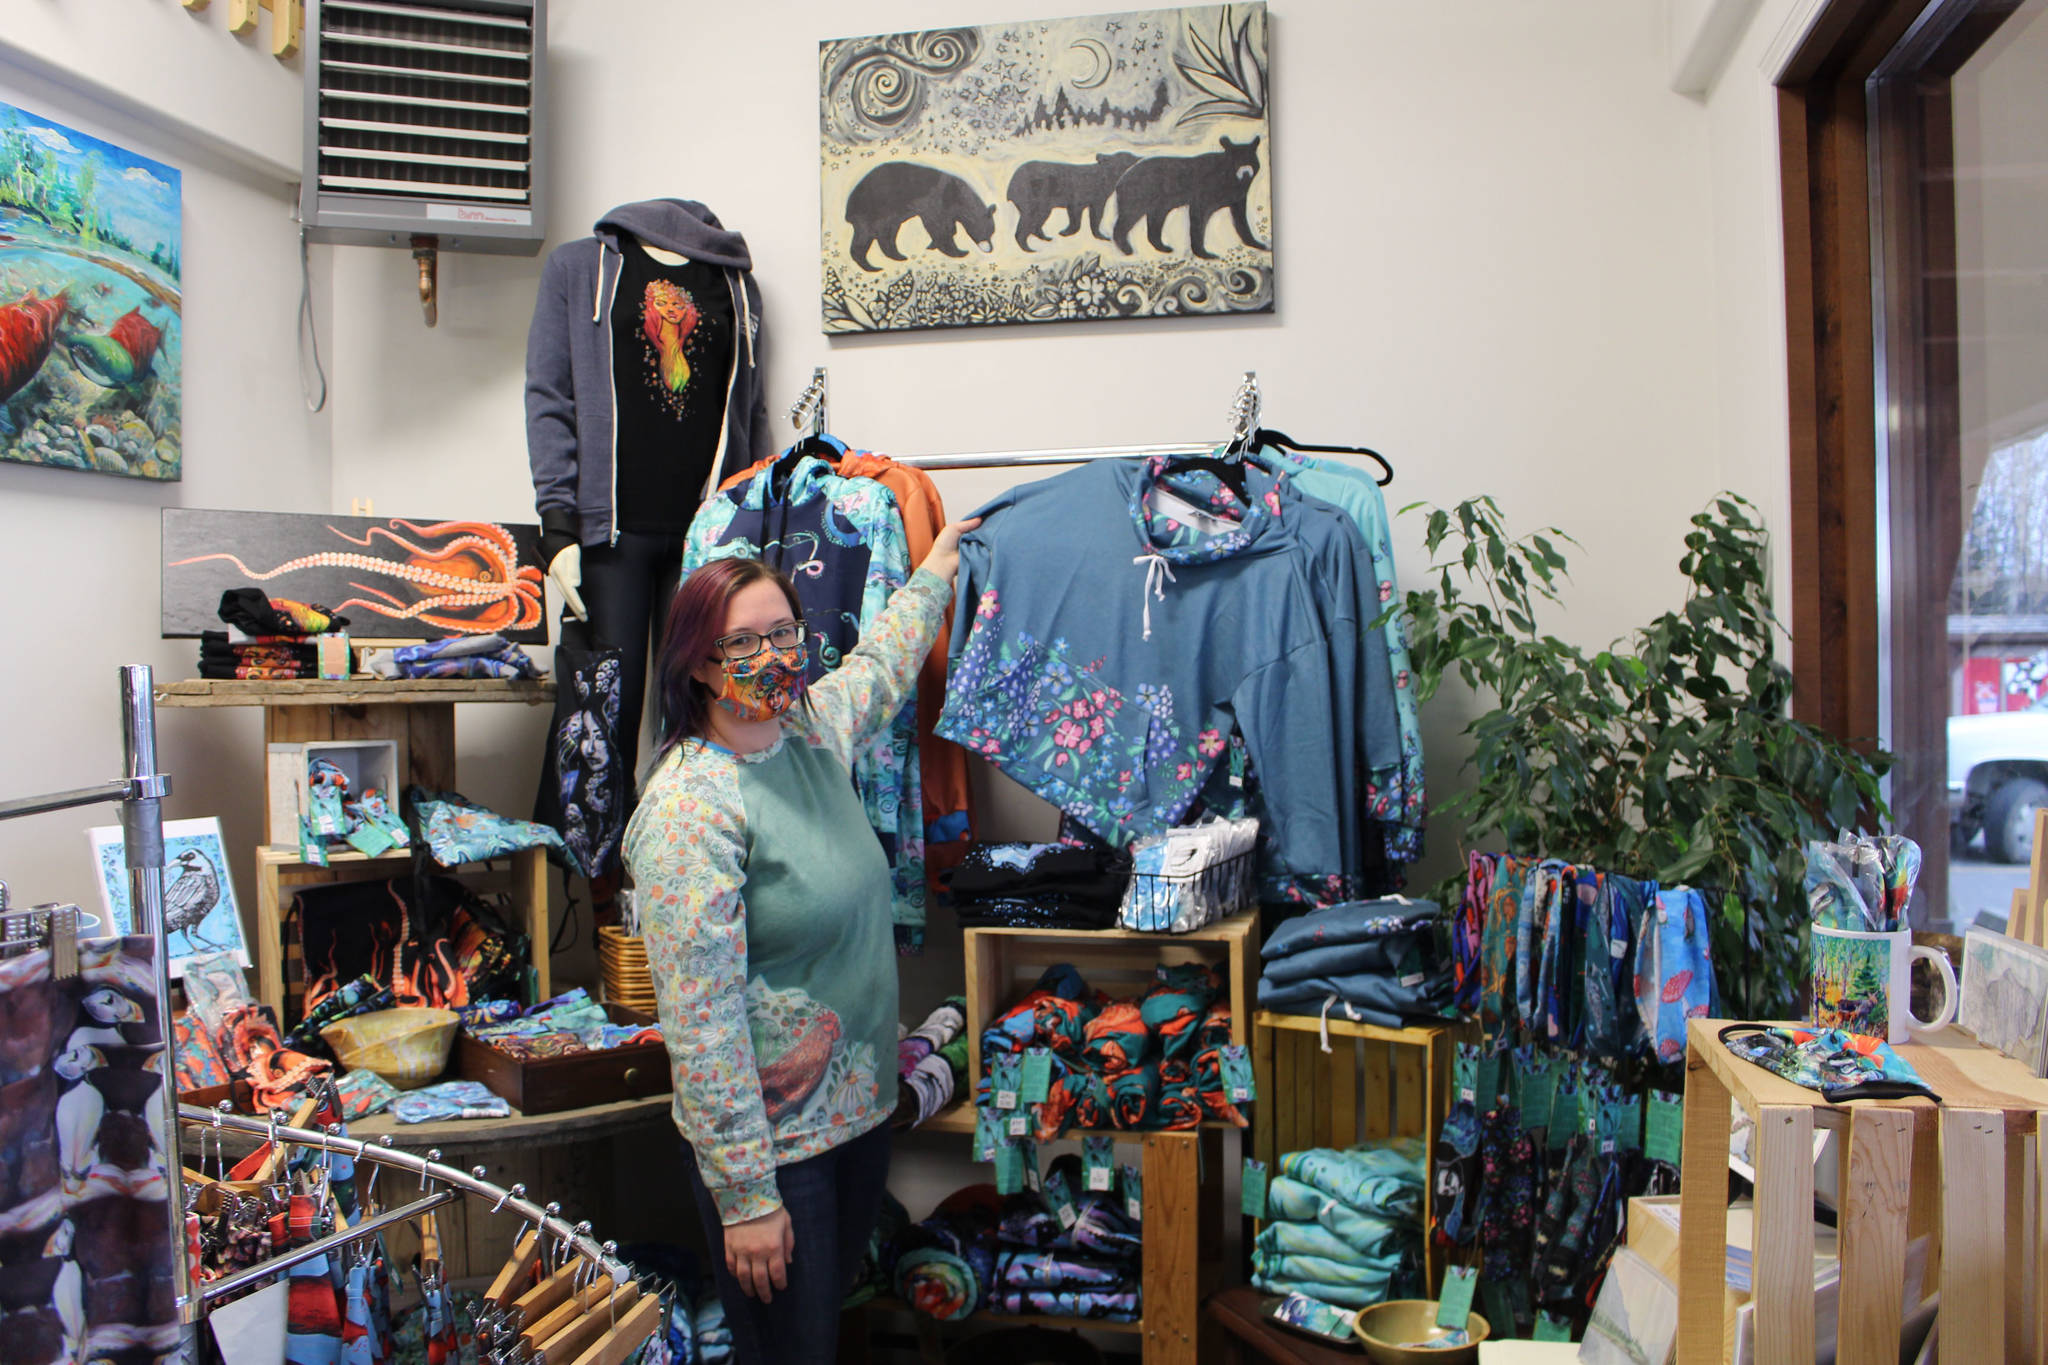 Amy Kruse, owner of Love From Alaska, shows off some of her wares inside Cook Inletkeeper’s Community Action Studio in Soldotna, Alaska, on Thursday, Nov. 5, 2020. (Photo by Brian Mazurek/Peninsula Clarion)